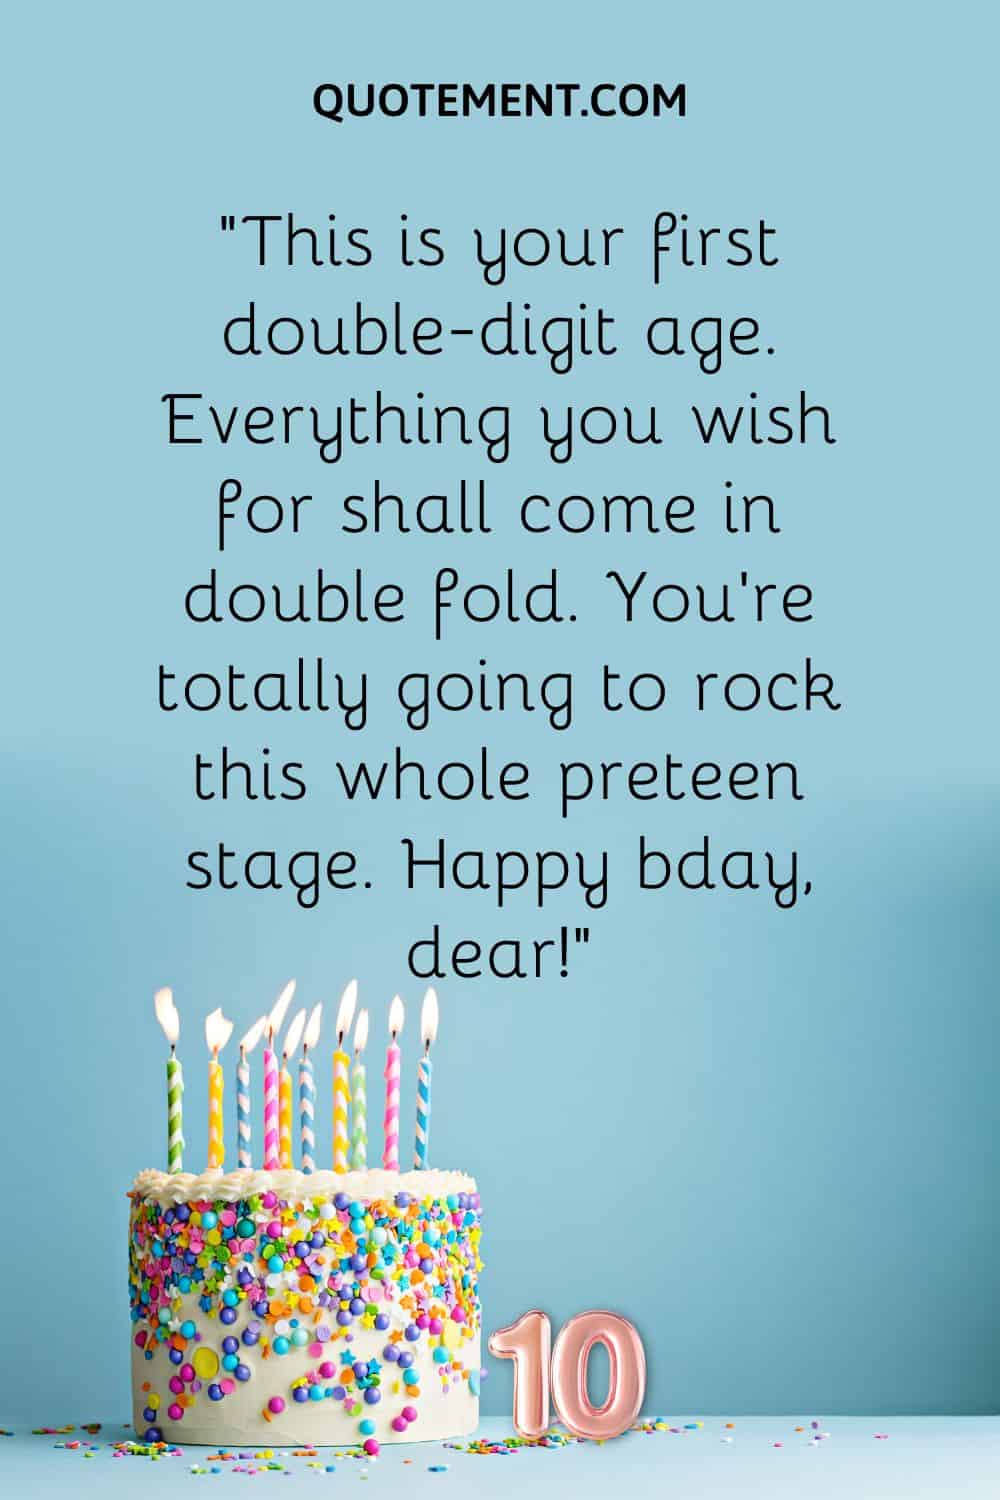 “This is your first double-digit age. Everything you wish for shall come in double fold. You’re totally going to rock this whole preteen stage. Happy bday, dear!”